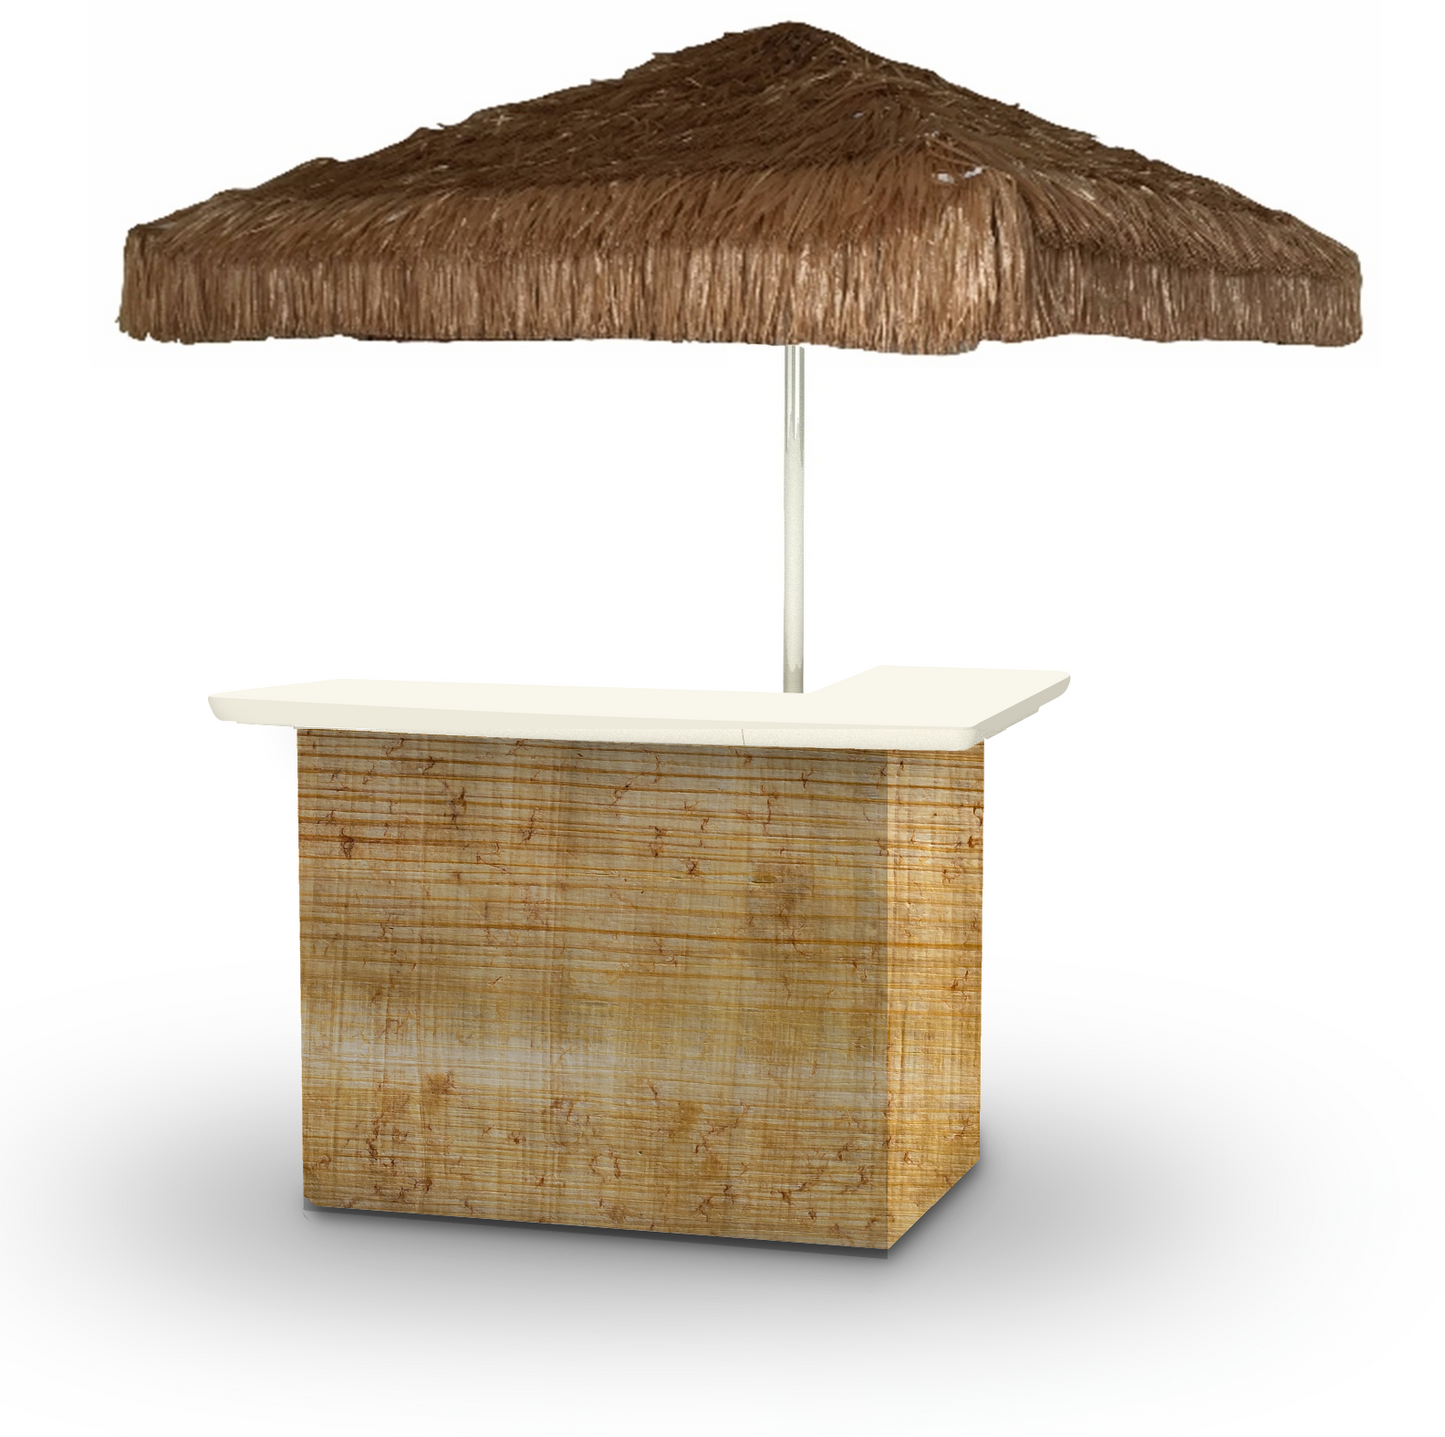 Particle Board Portable Pop-Up Bar